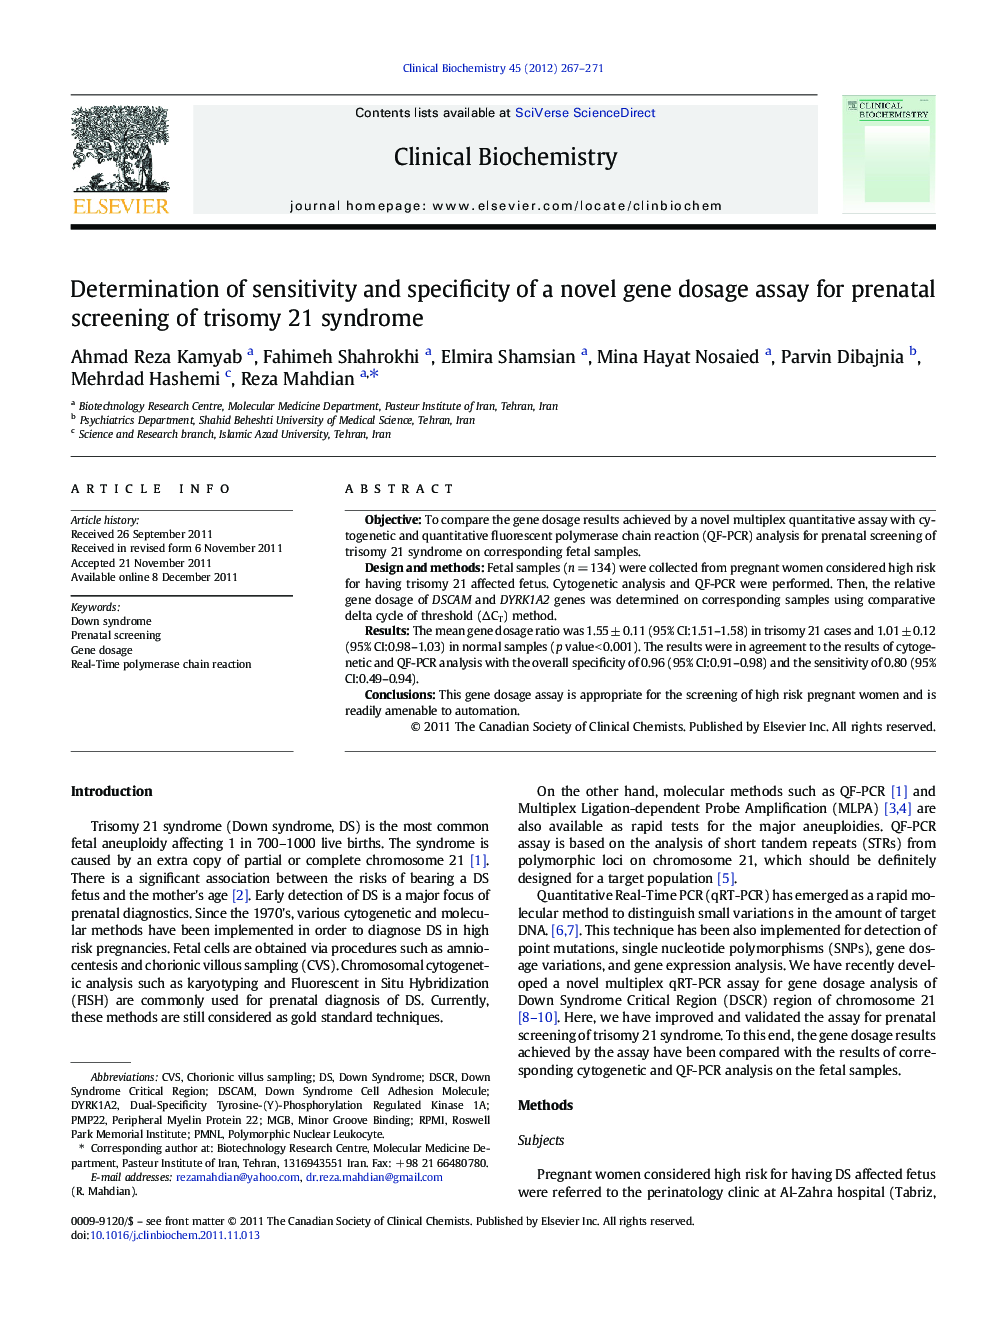 Determination of sensitivity and specificity of a novel gene dosage assay for prenatal screening of trisomy 21 syndrome